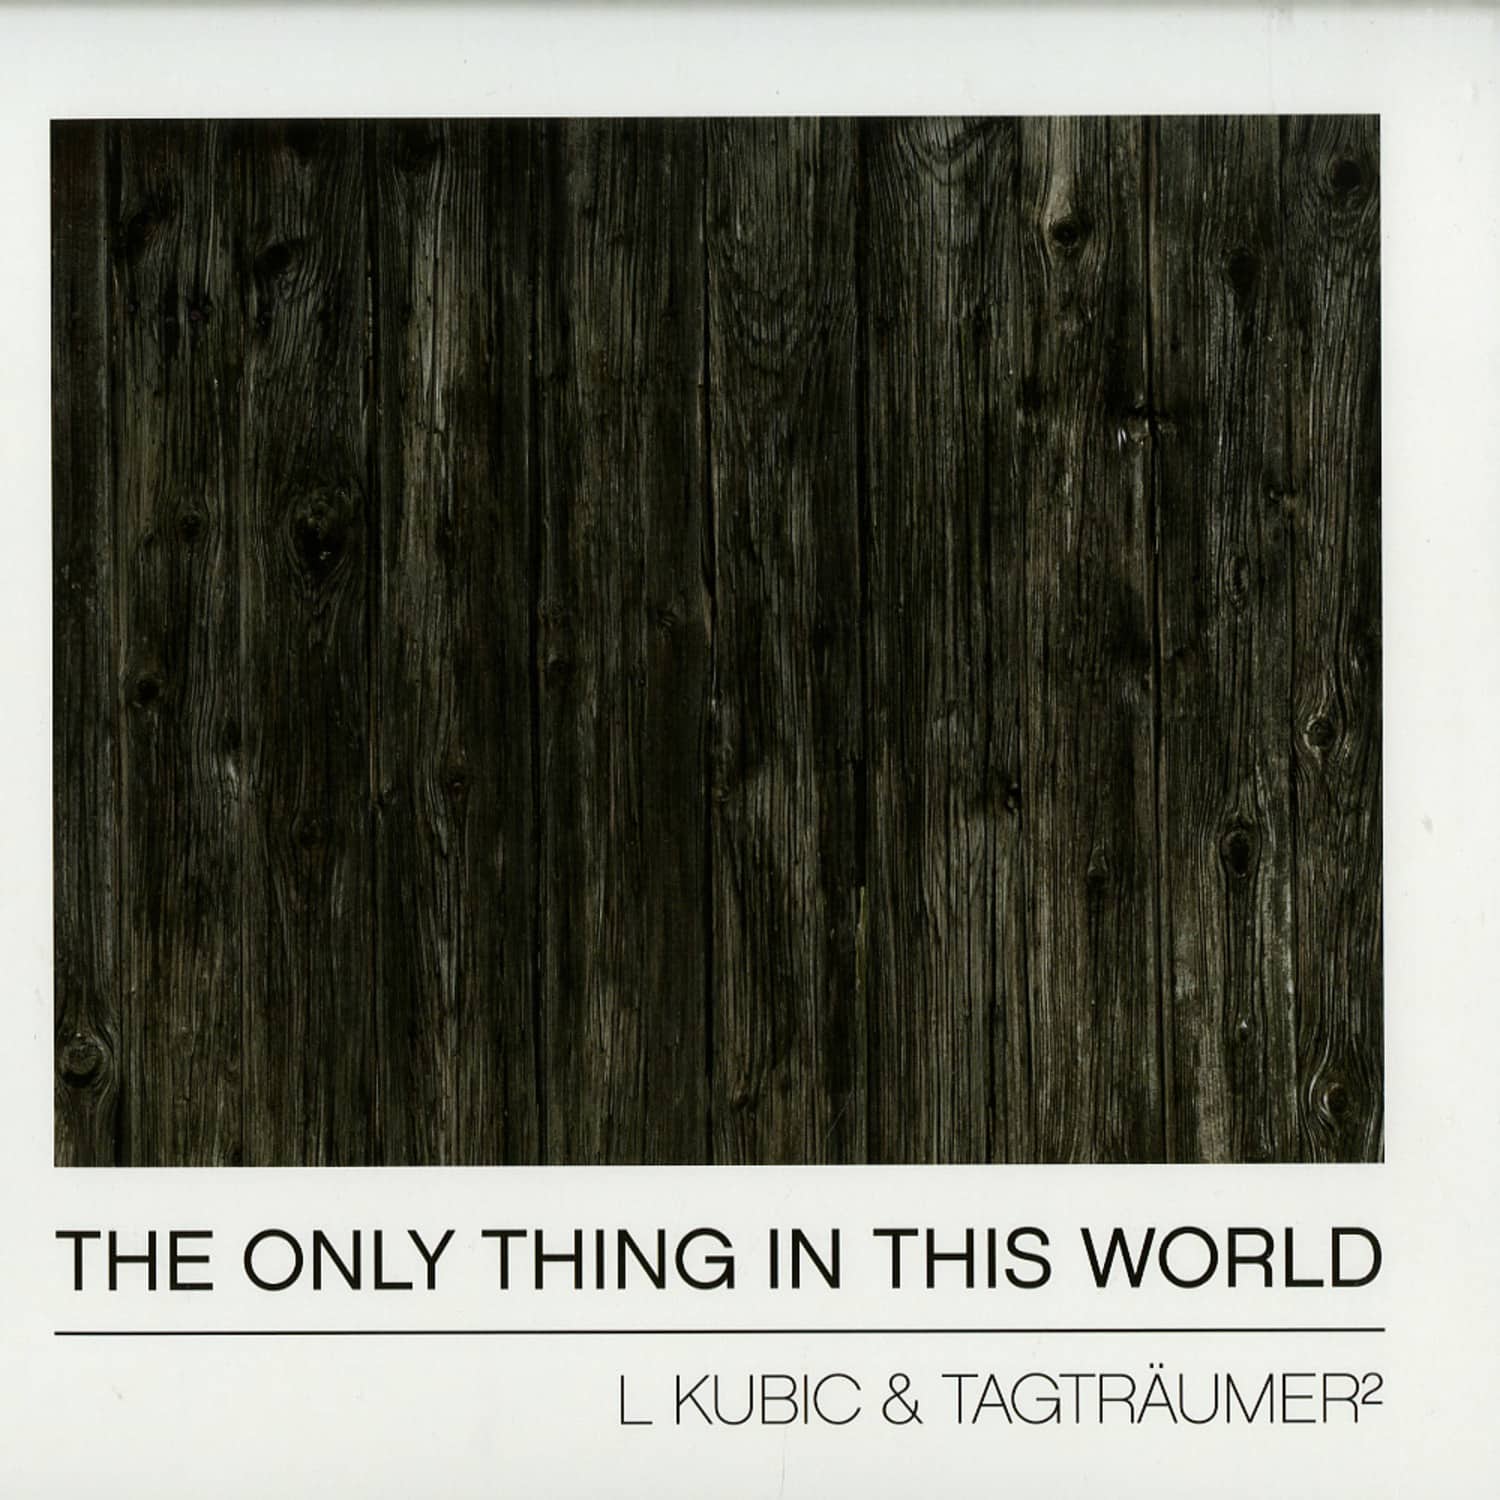 L Kubic & Tagtraeumer - THE ONLY THING IN THIS WORLD 